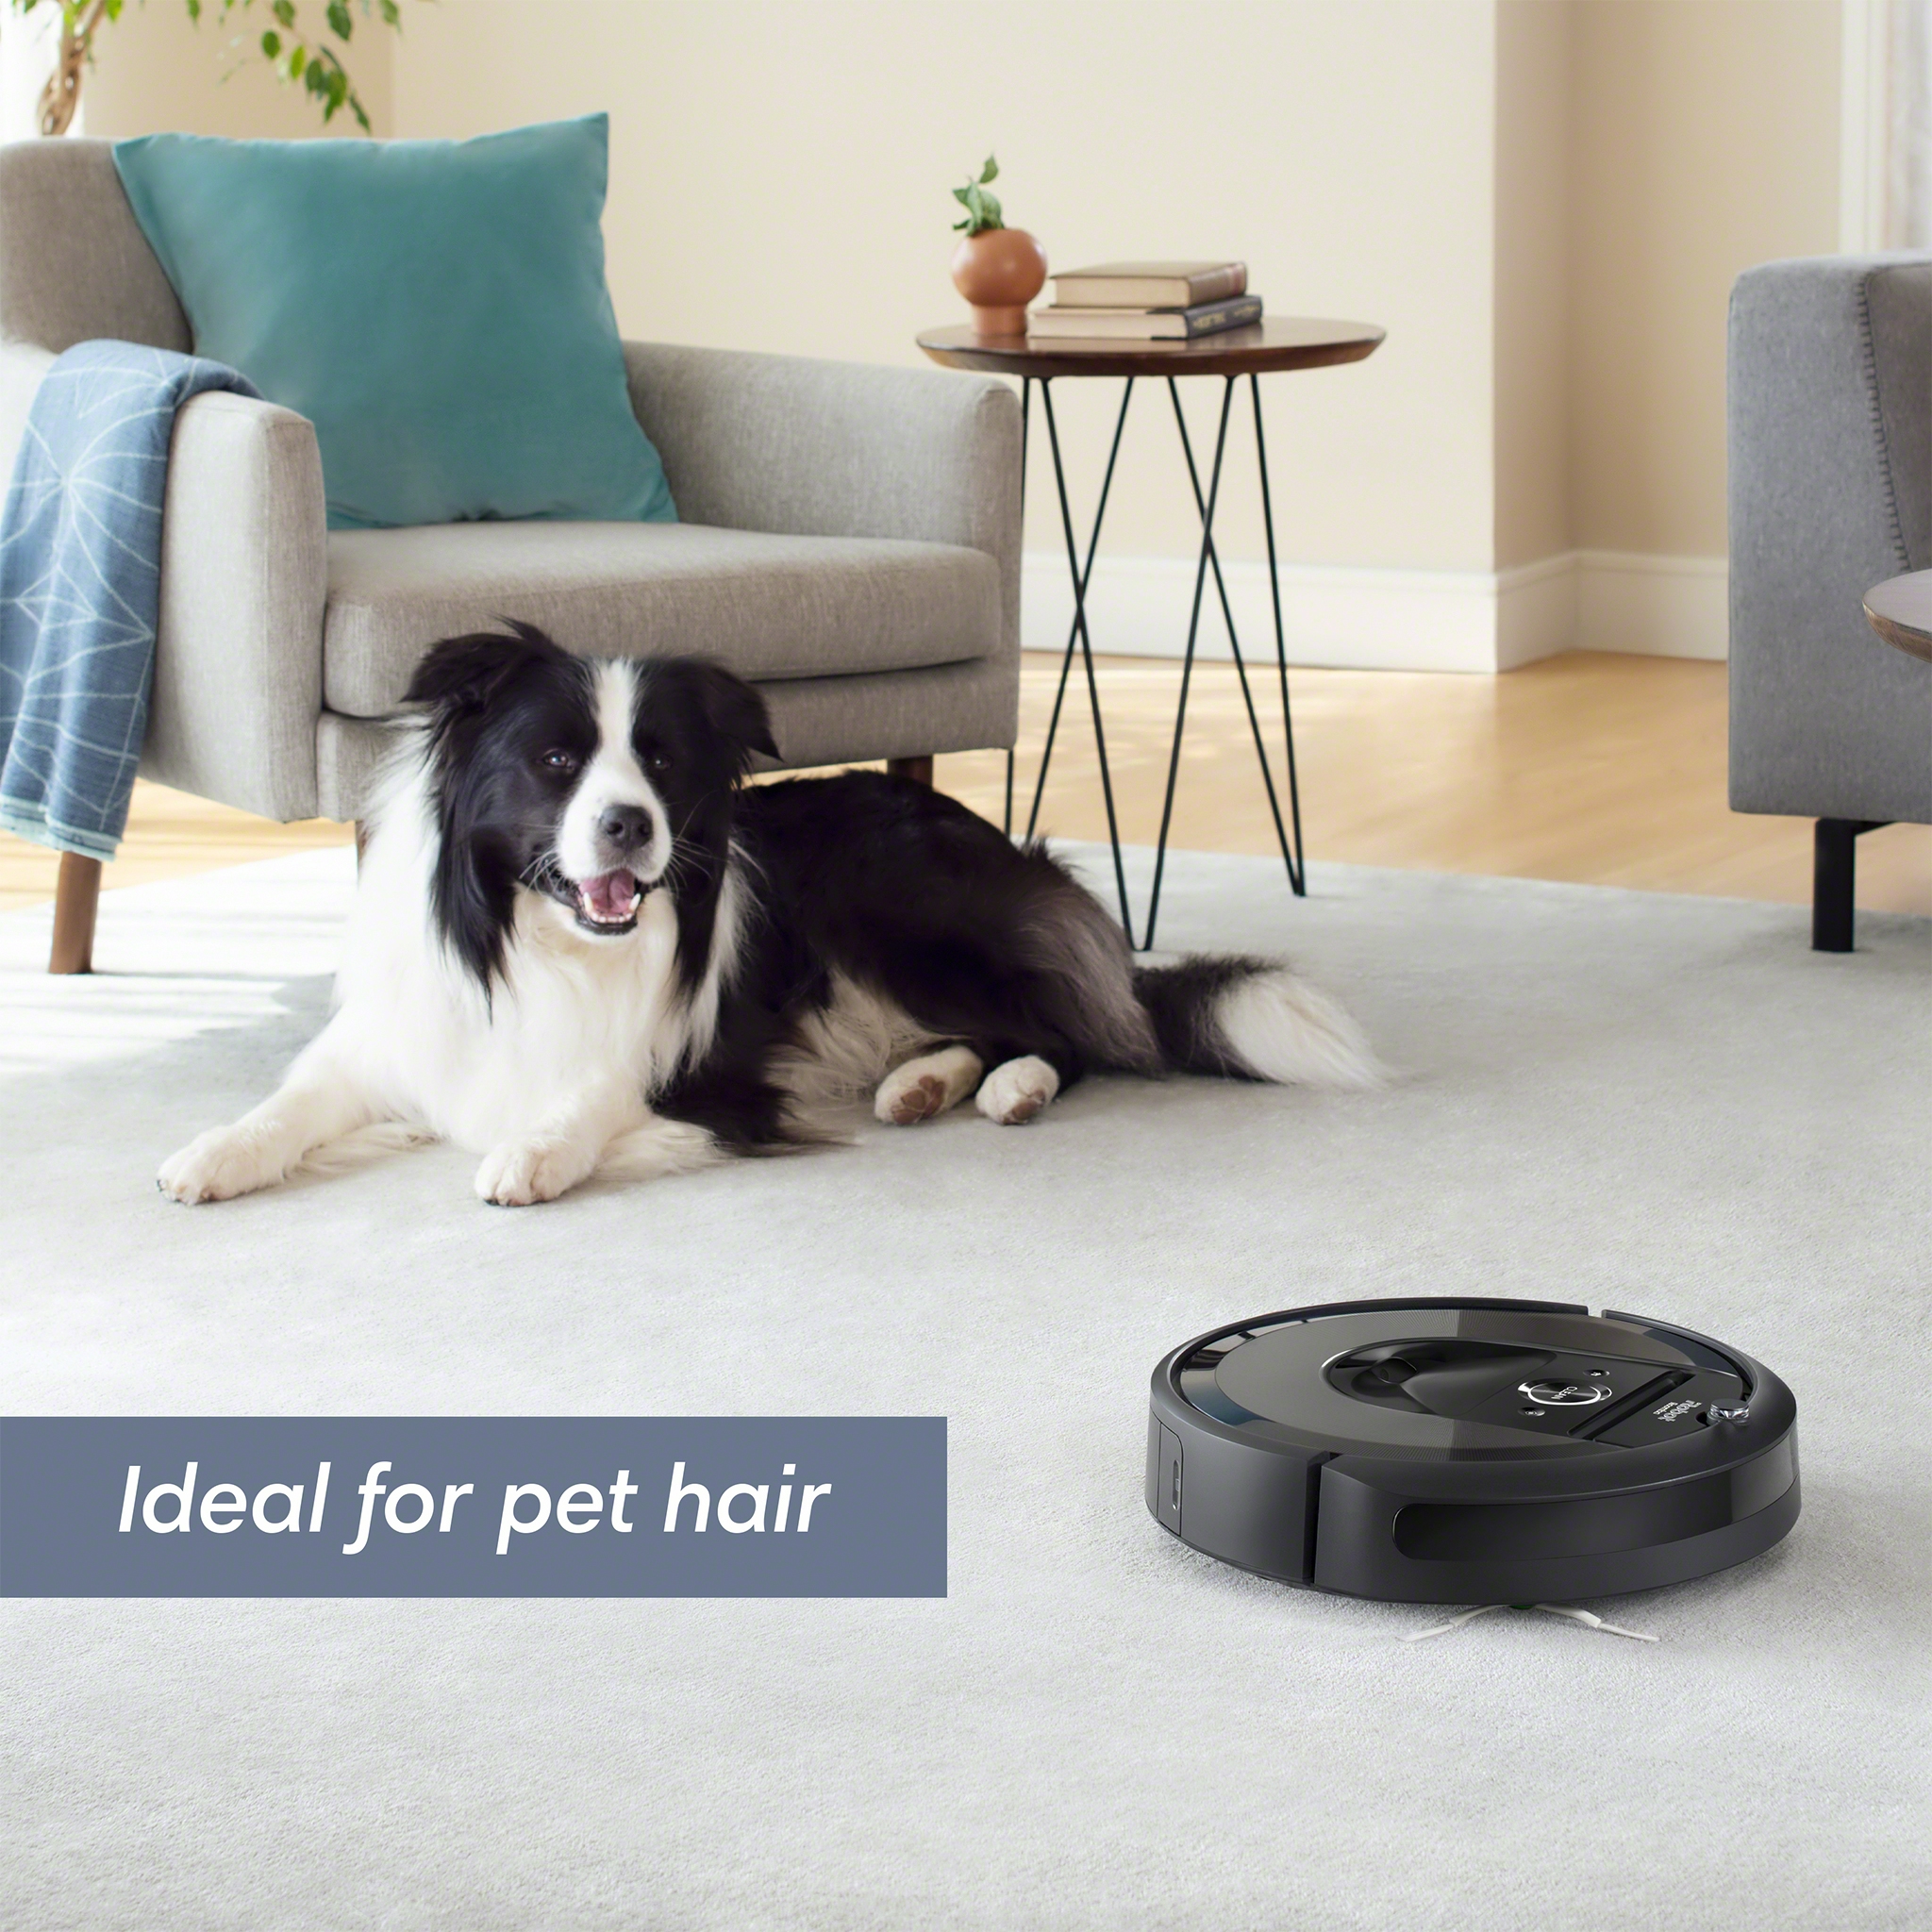 iRobot Roomba i7 (7150) Robot Vacuum- Wi-Fi Connected, Smart Mapping, Works with Google Home, Ideal for Pet Hair, Carpets, Hard Floors - image 11 of 16